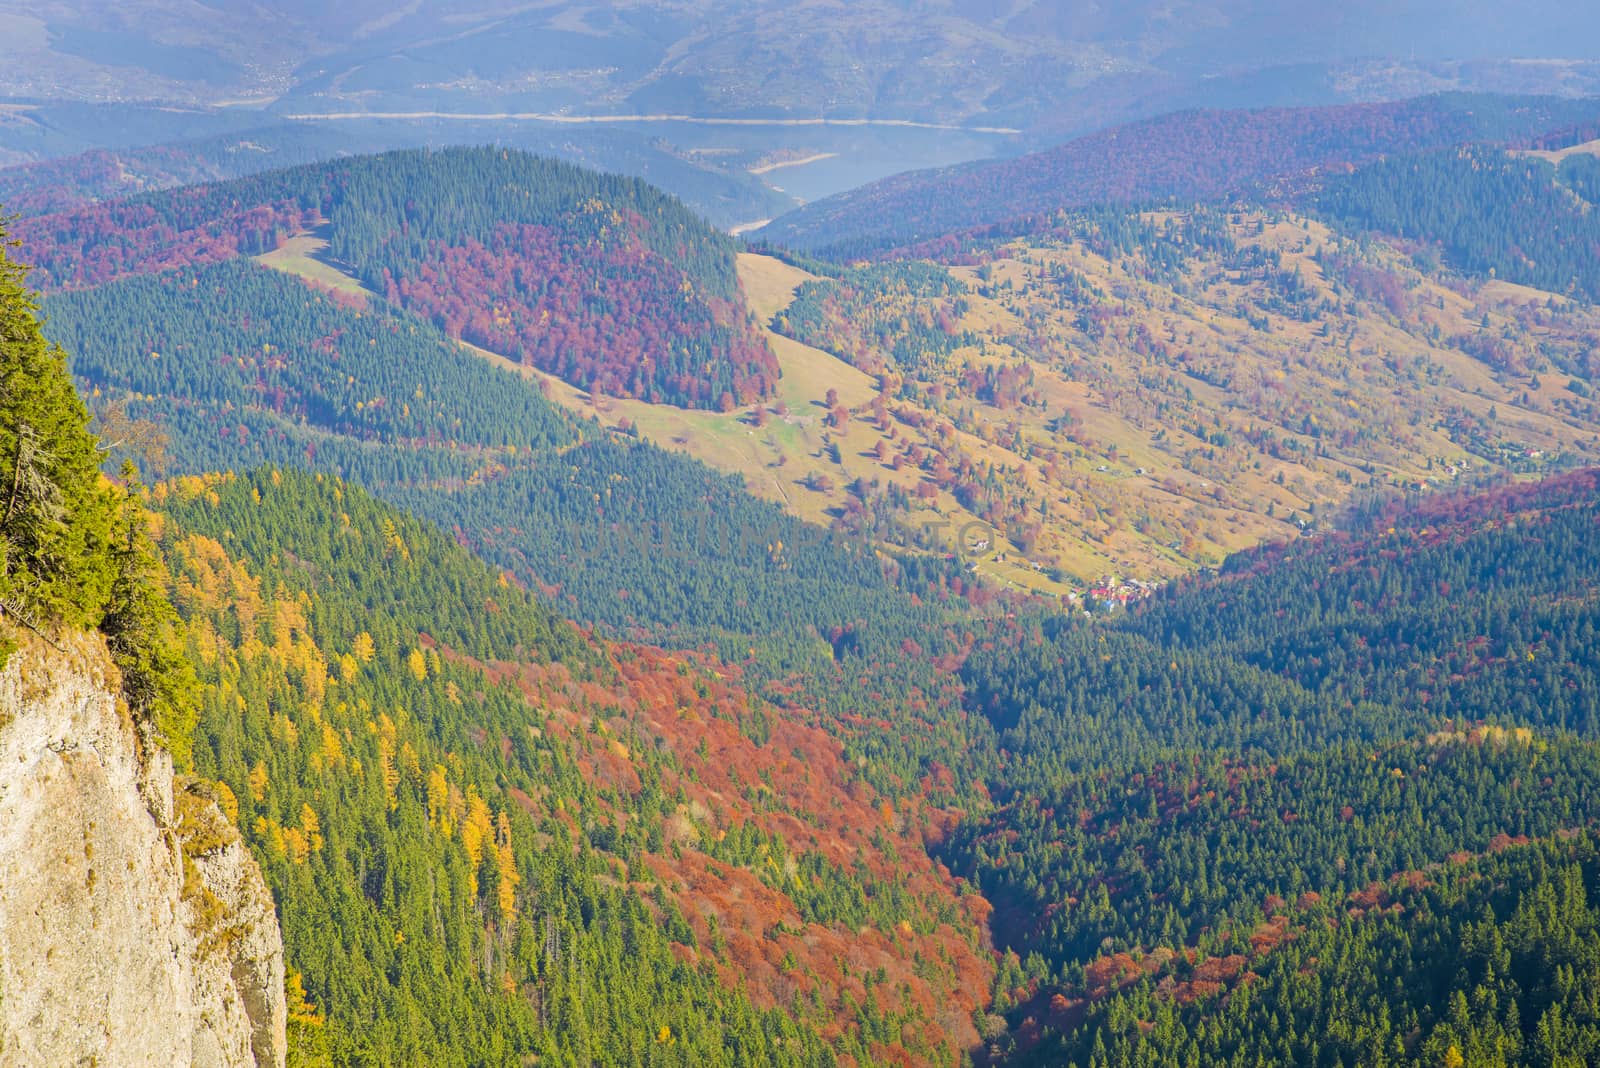 Autumn aerial landscape from the mountain, colored forest and valley scene